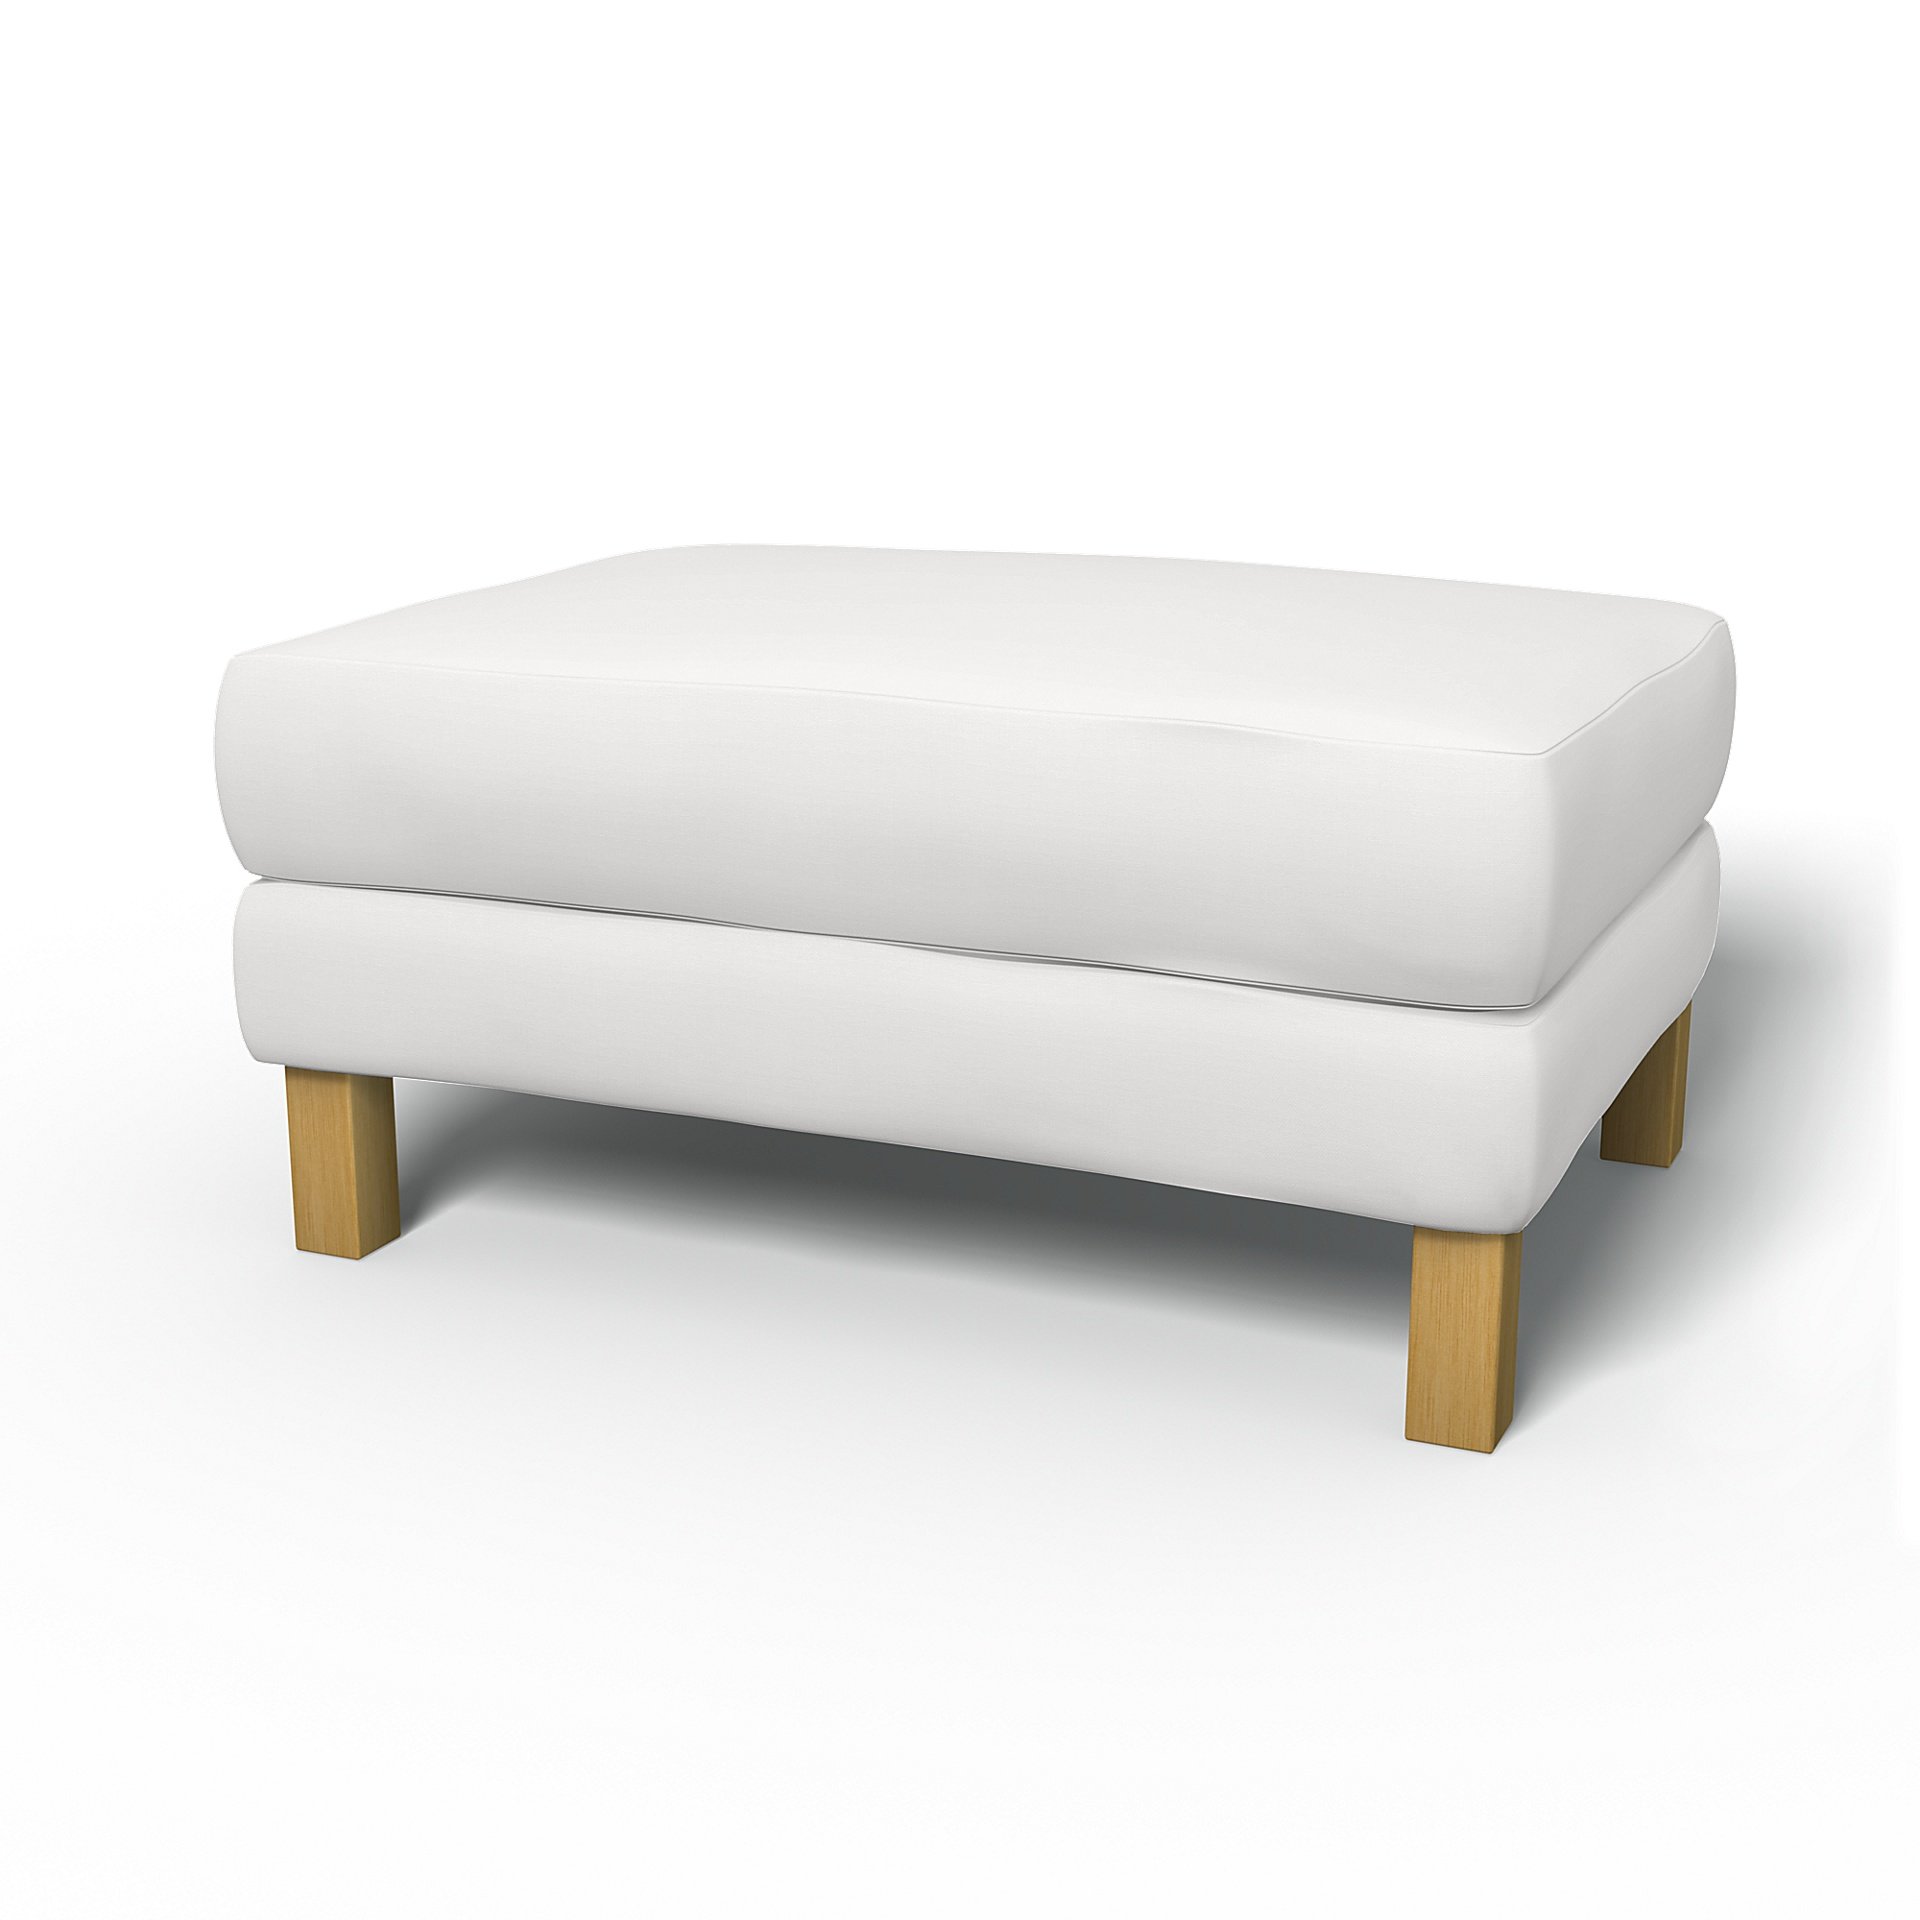 IKEA - Karlstad Footstool Cover, Absolute White, Cotton - Bemz